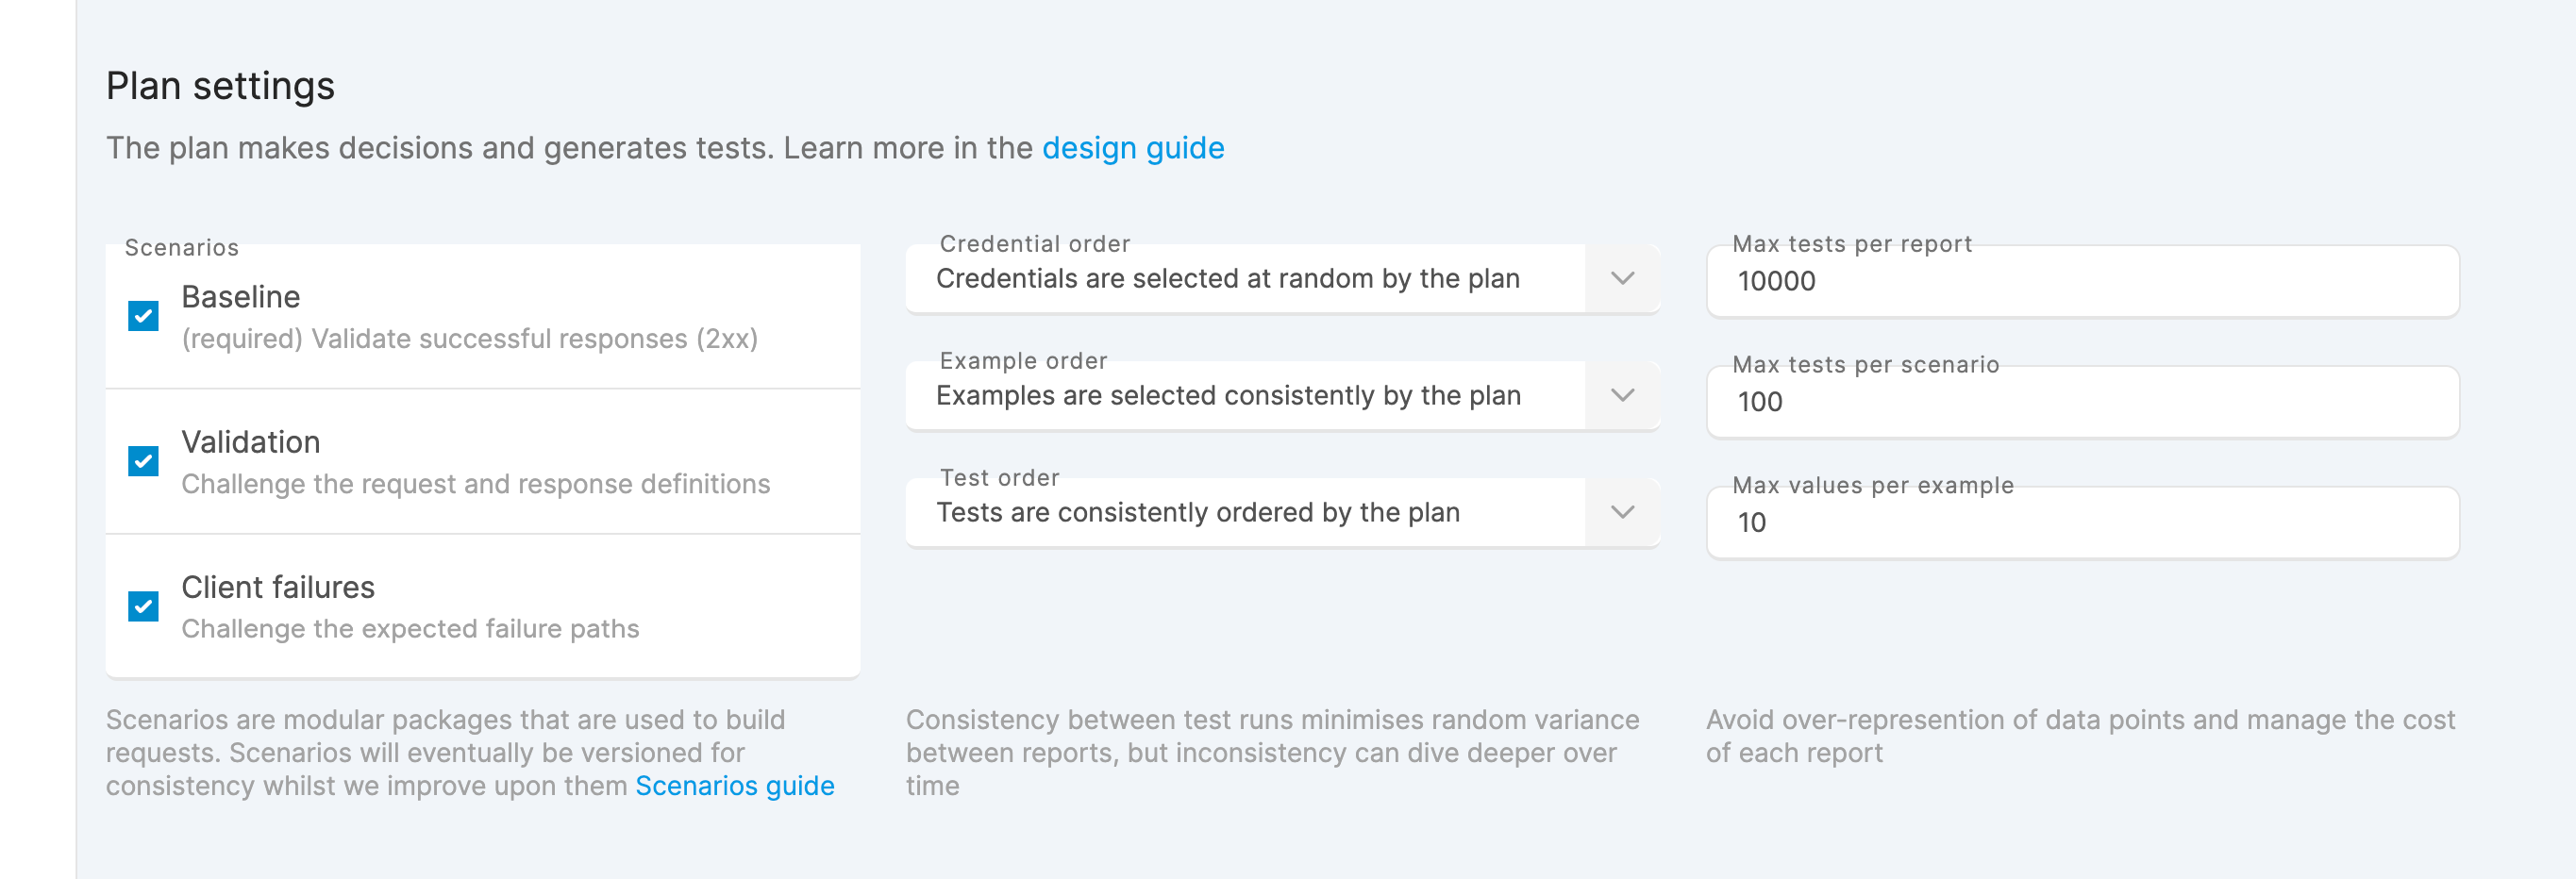 Control how the plan builds test requests, before a report starts